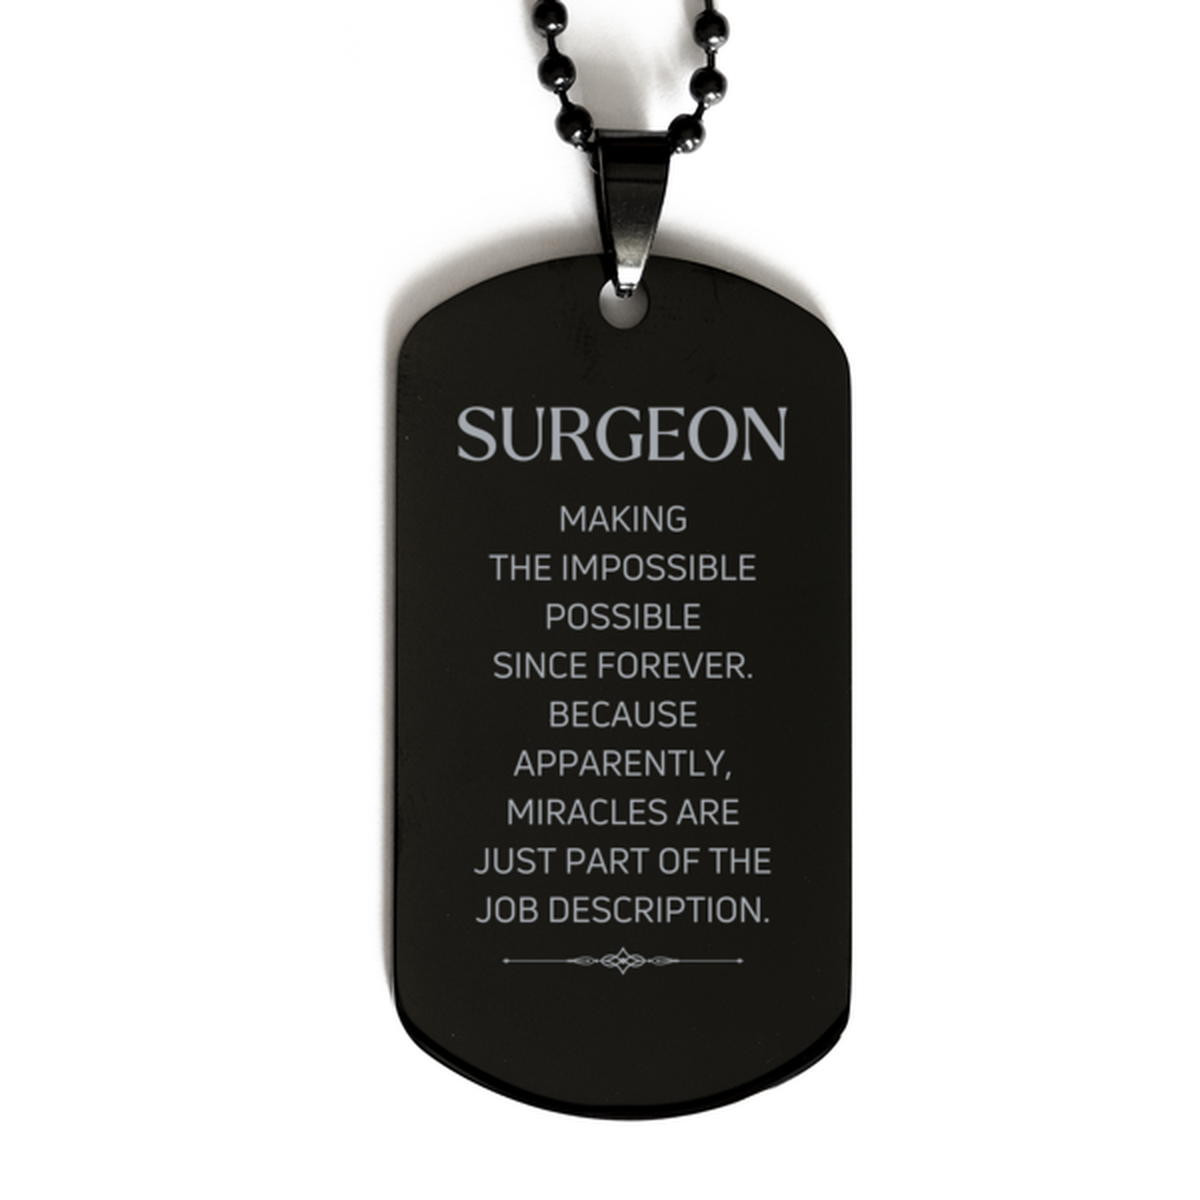 Funny Surgeon Gifts, Miracles are just part of the job description, Inspirational Birthday Black Dog Tag For Surgeon, Men, Women, Coworkers, Friends, Boss